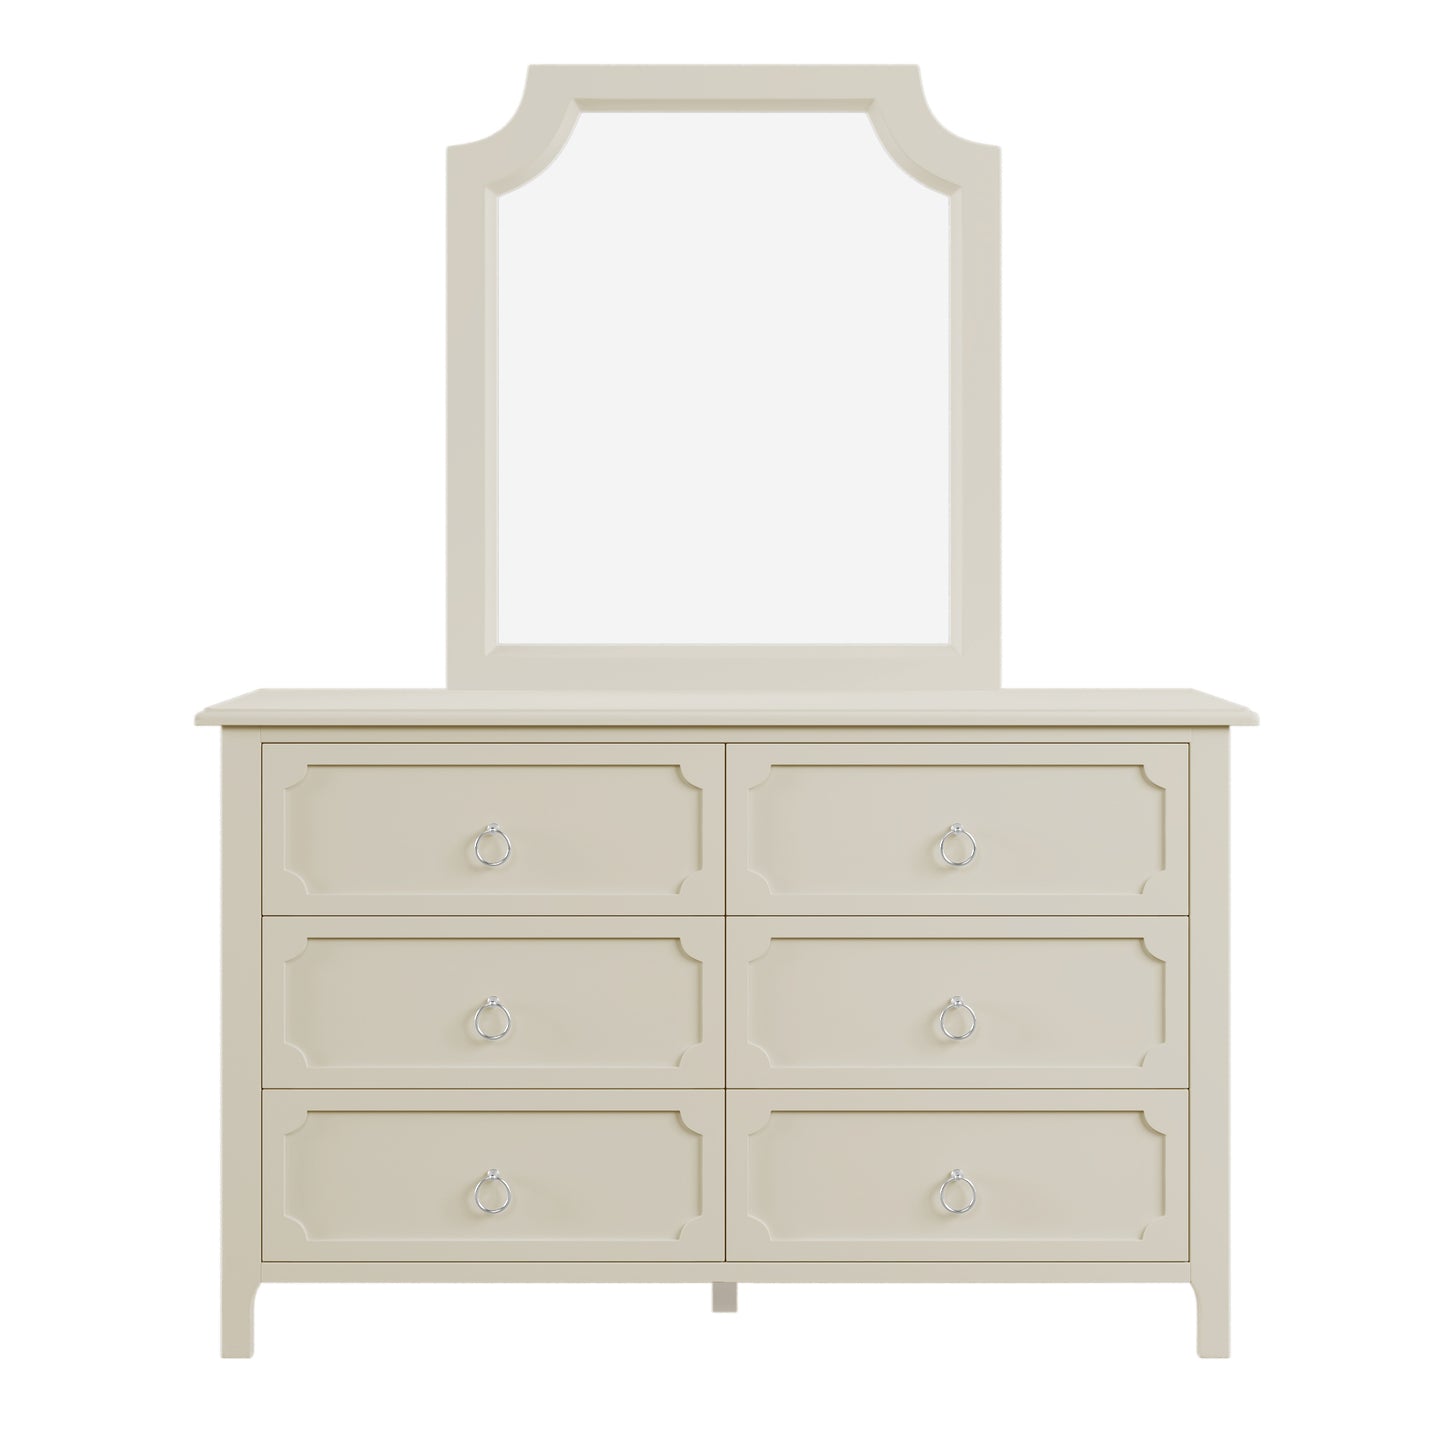 Milky White Rubber Wooden Dresser Six Large Drawers Silver Metal Handles for Living Room Guest Room Bedroom